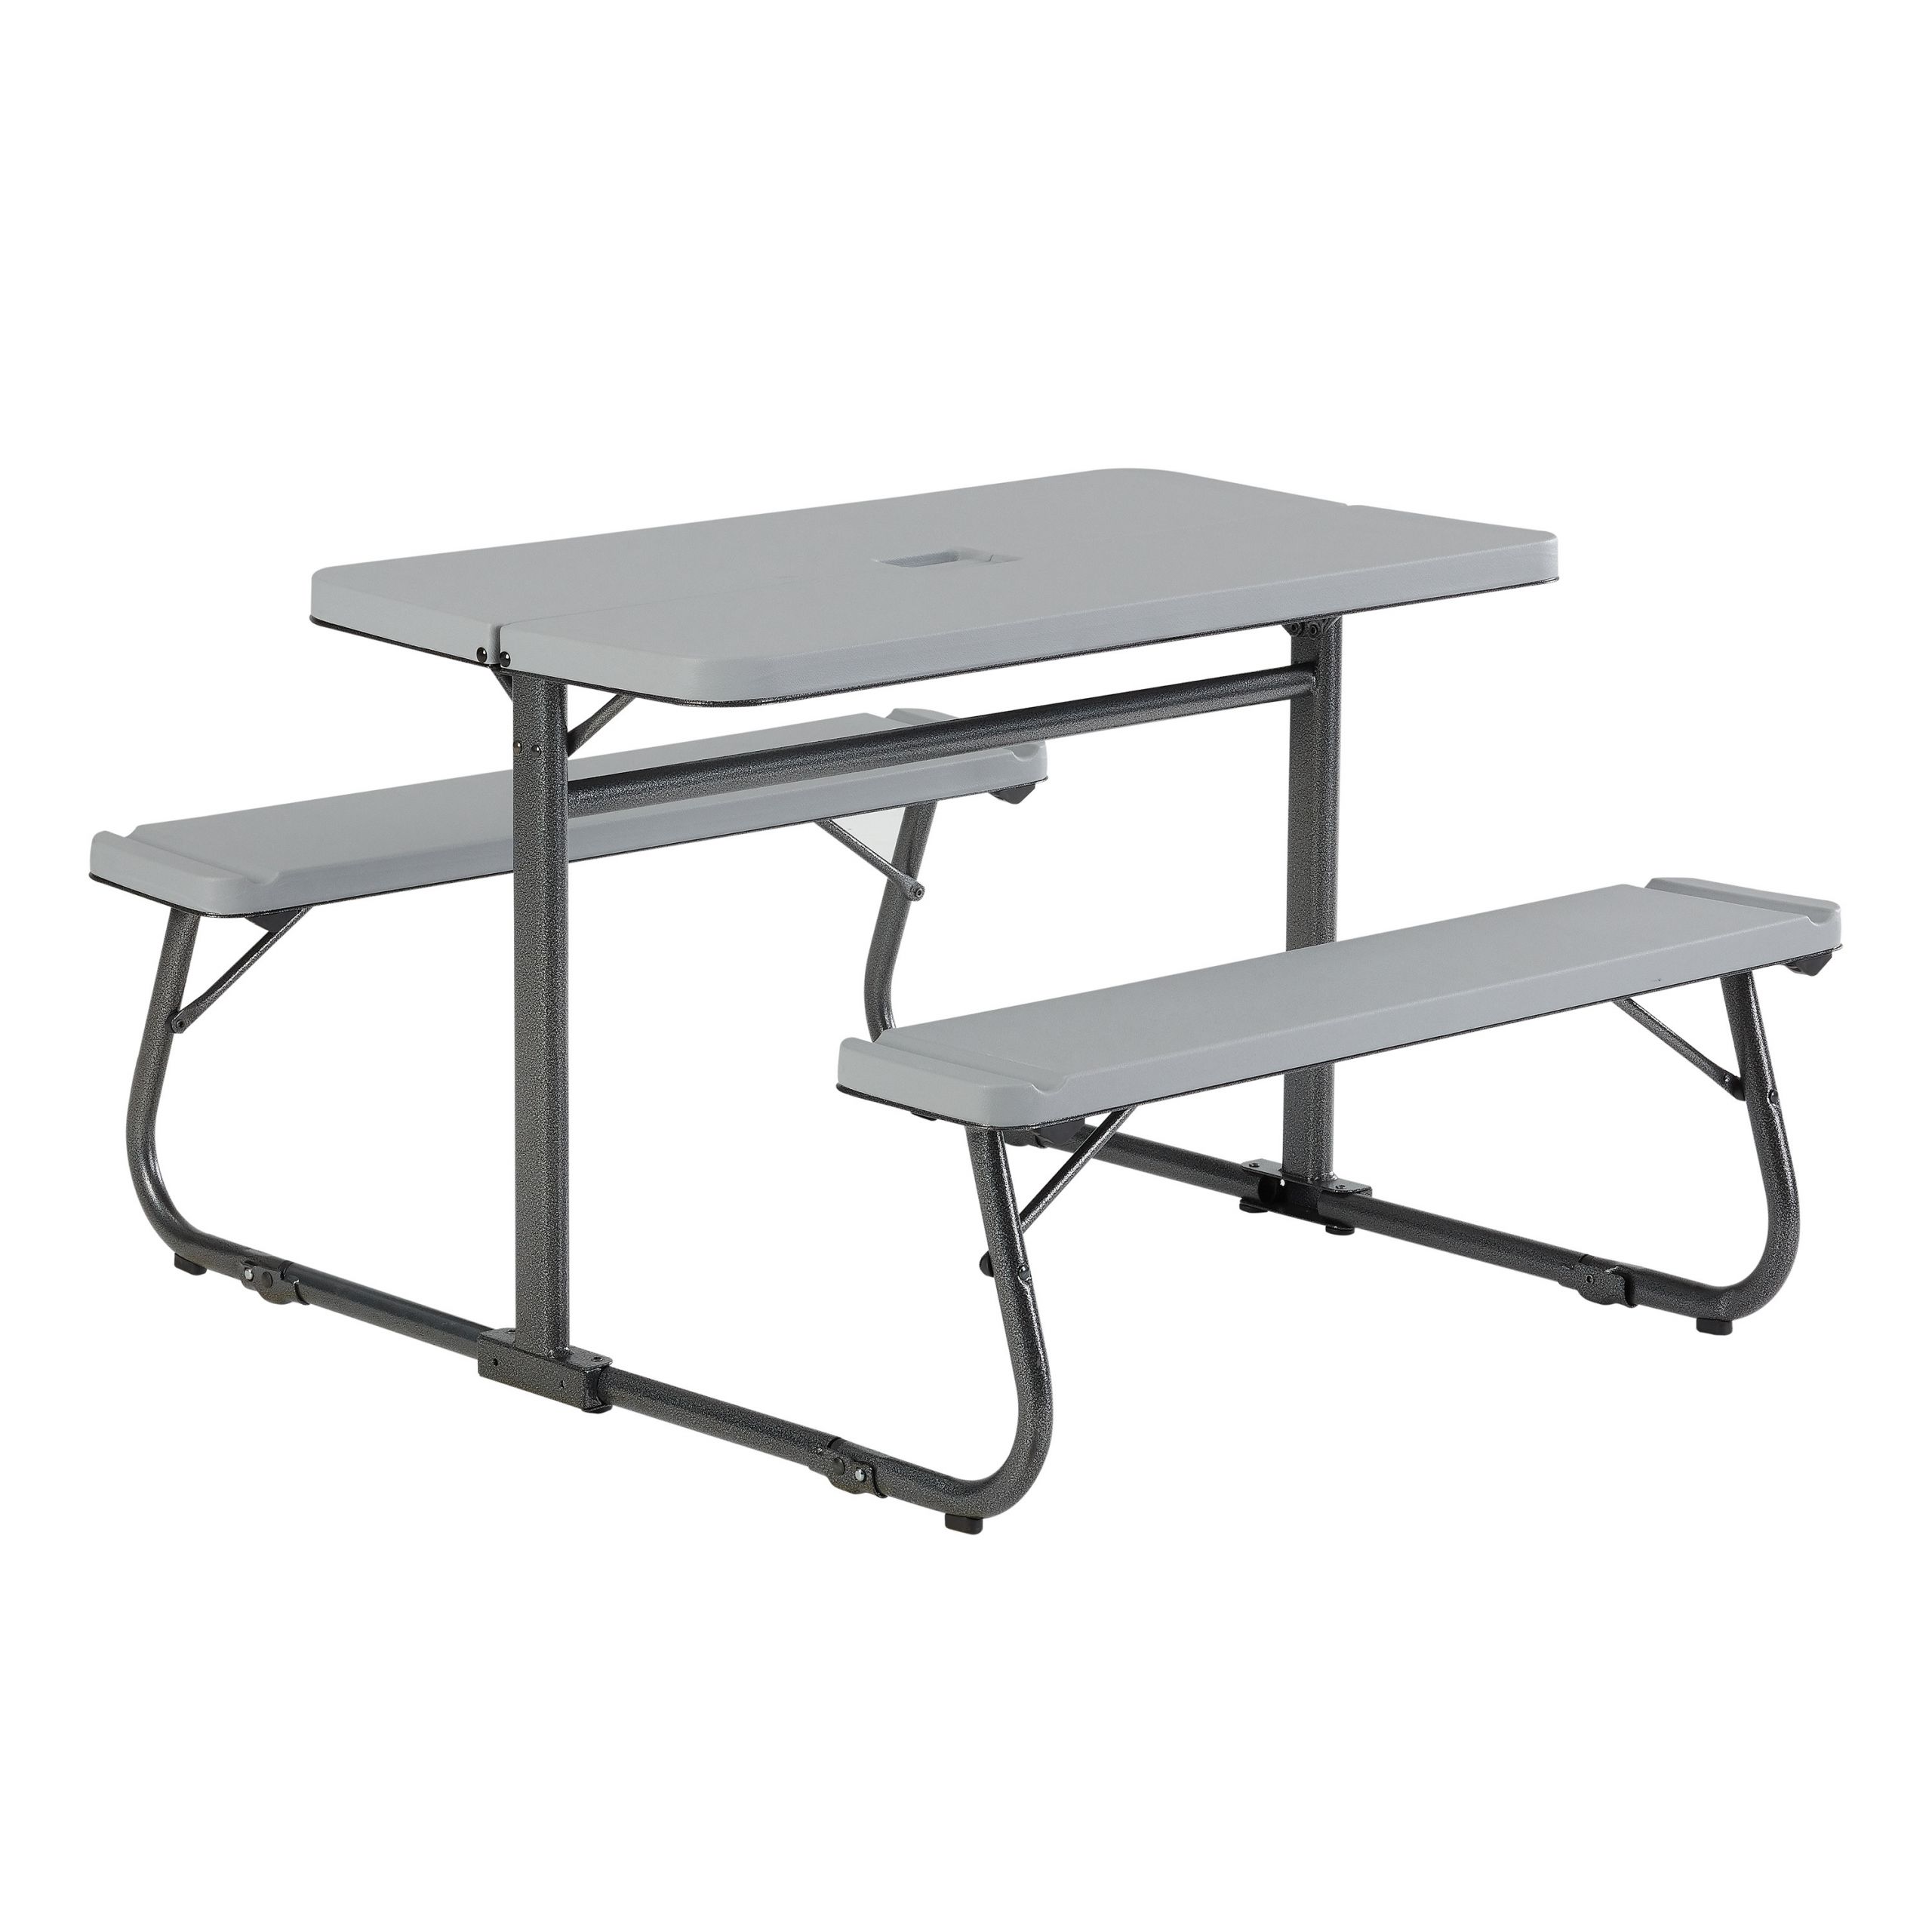 Kids Folding Table
 Your Zone Folding Kid s Activity Table with Two Benches